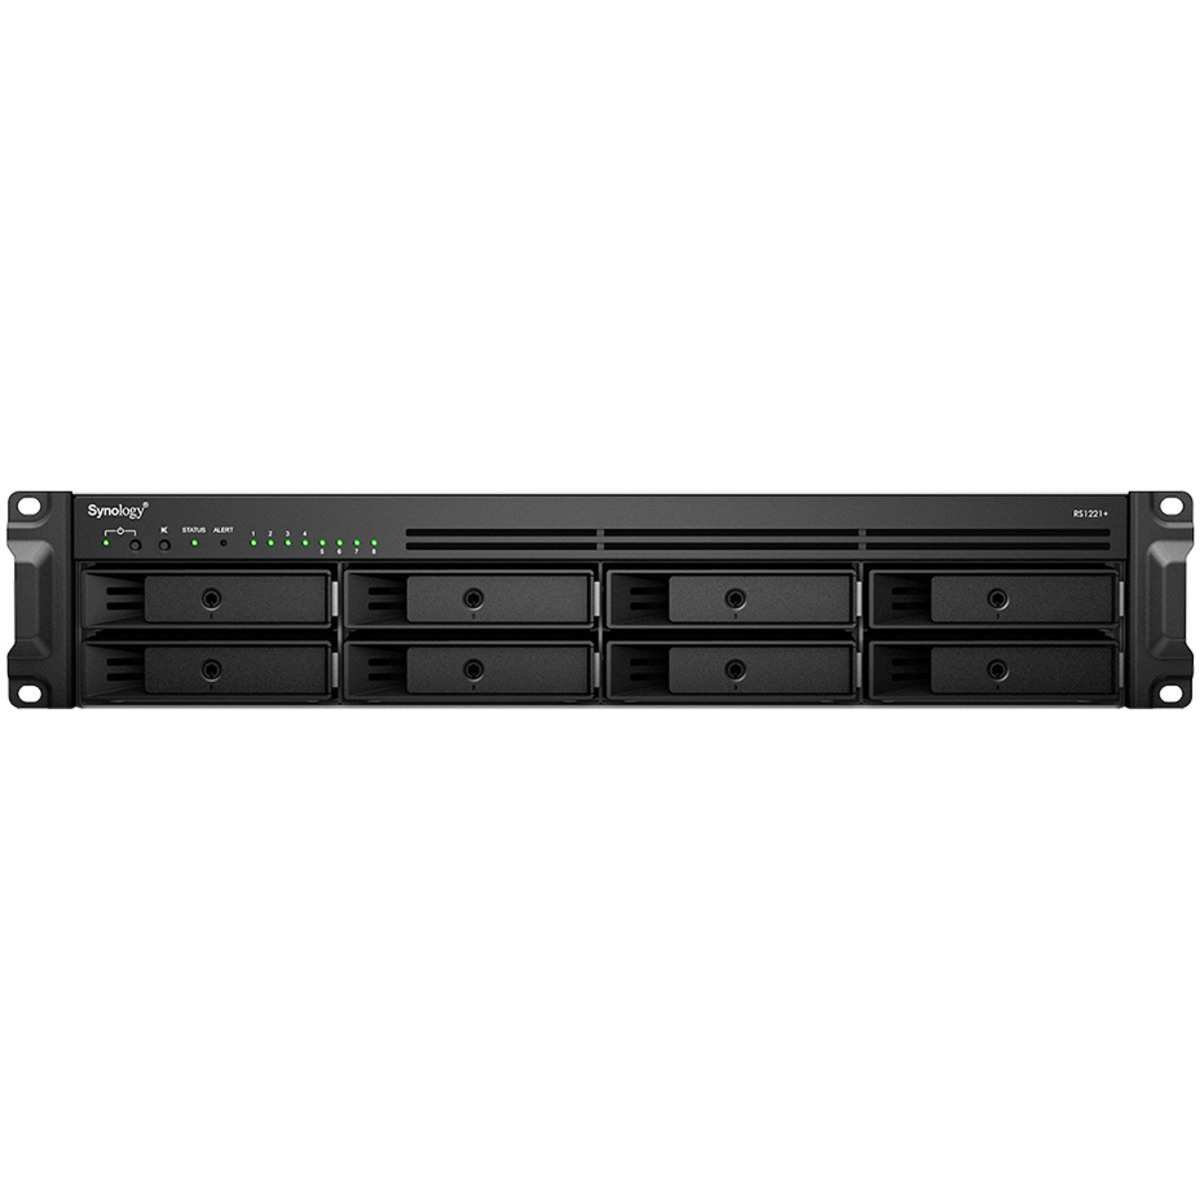 buy Synology RackStation RS1221+ RackMount NAS - Network Attached Storage Device Burn-In Tested Configurations - nas headquarters buy network attached storage server device das new raid-5 free shipping usa RackStation RS1221+